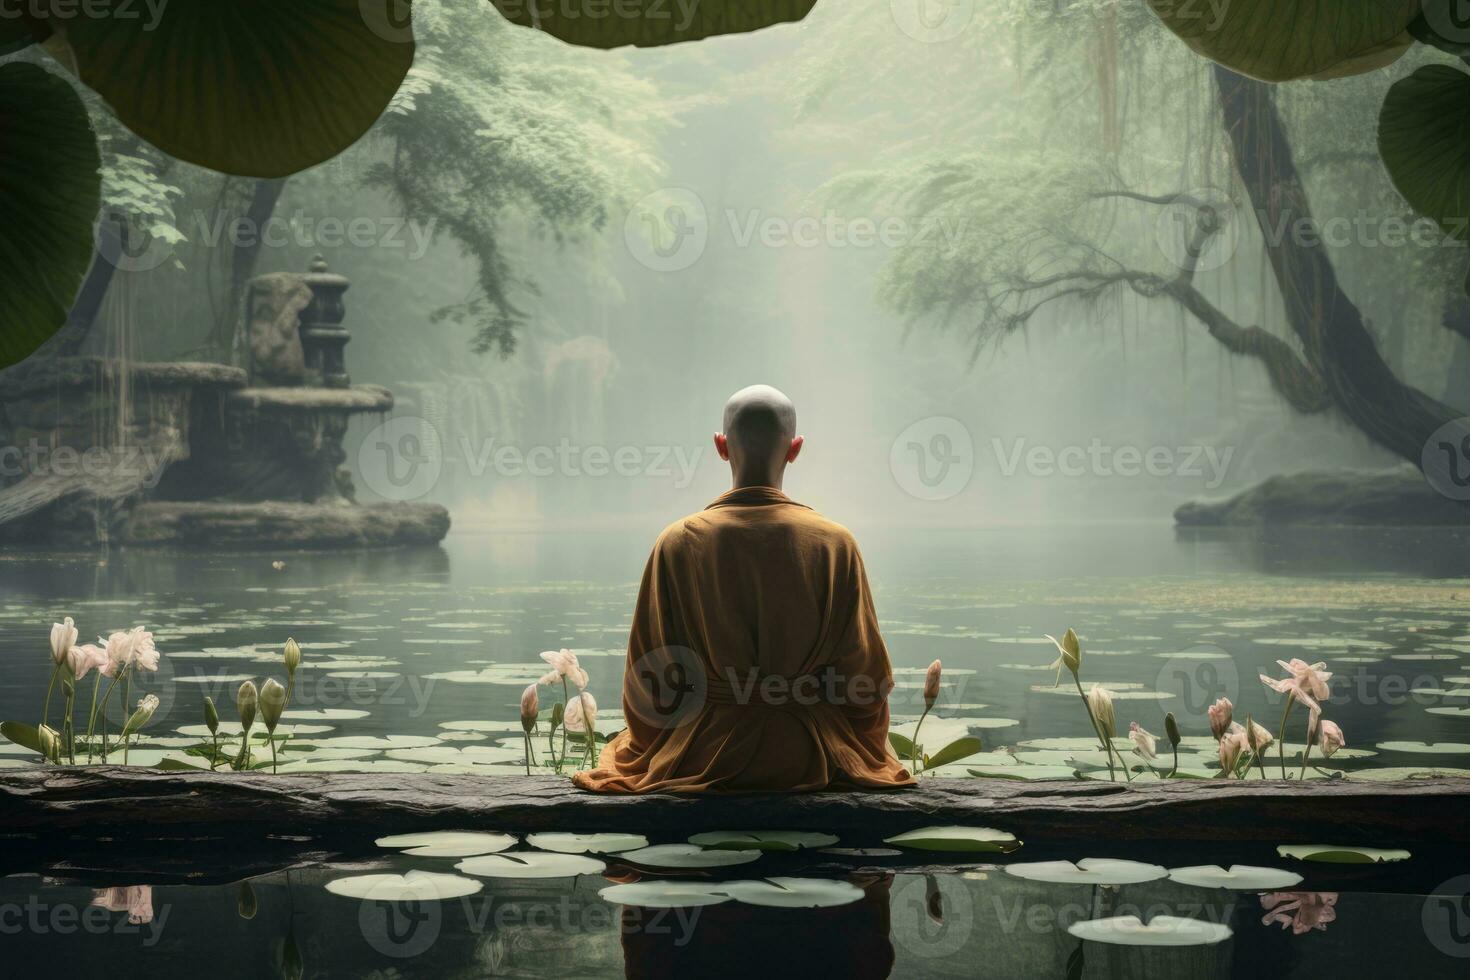 https://static.vecteezy.com/system/resources/previews/035/187/517/non_2x/ai-generated-sitting-spirituality-calm-buddhism-tradition-culture-nature-buddhist-asian-pray-faith-photo.jpg